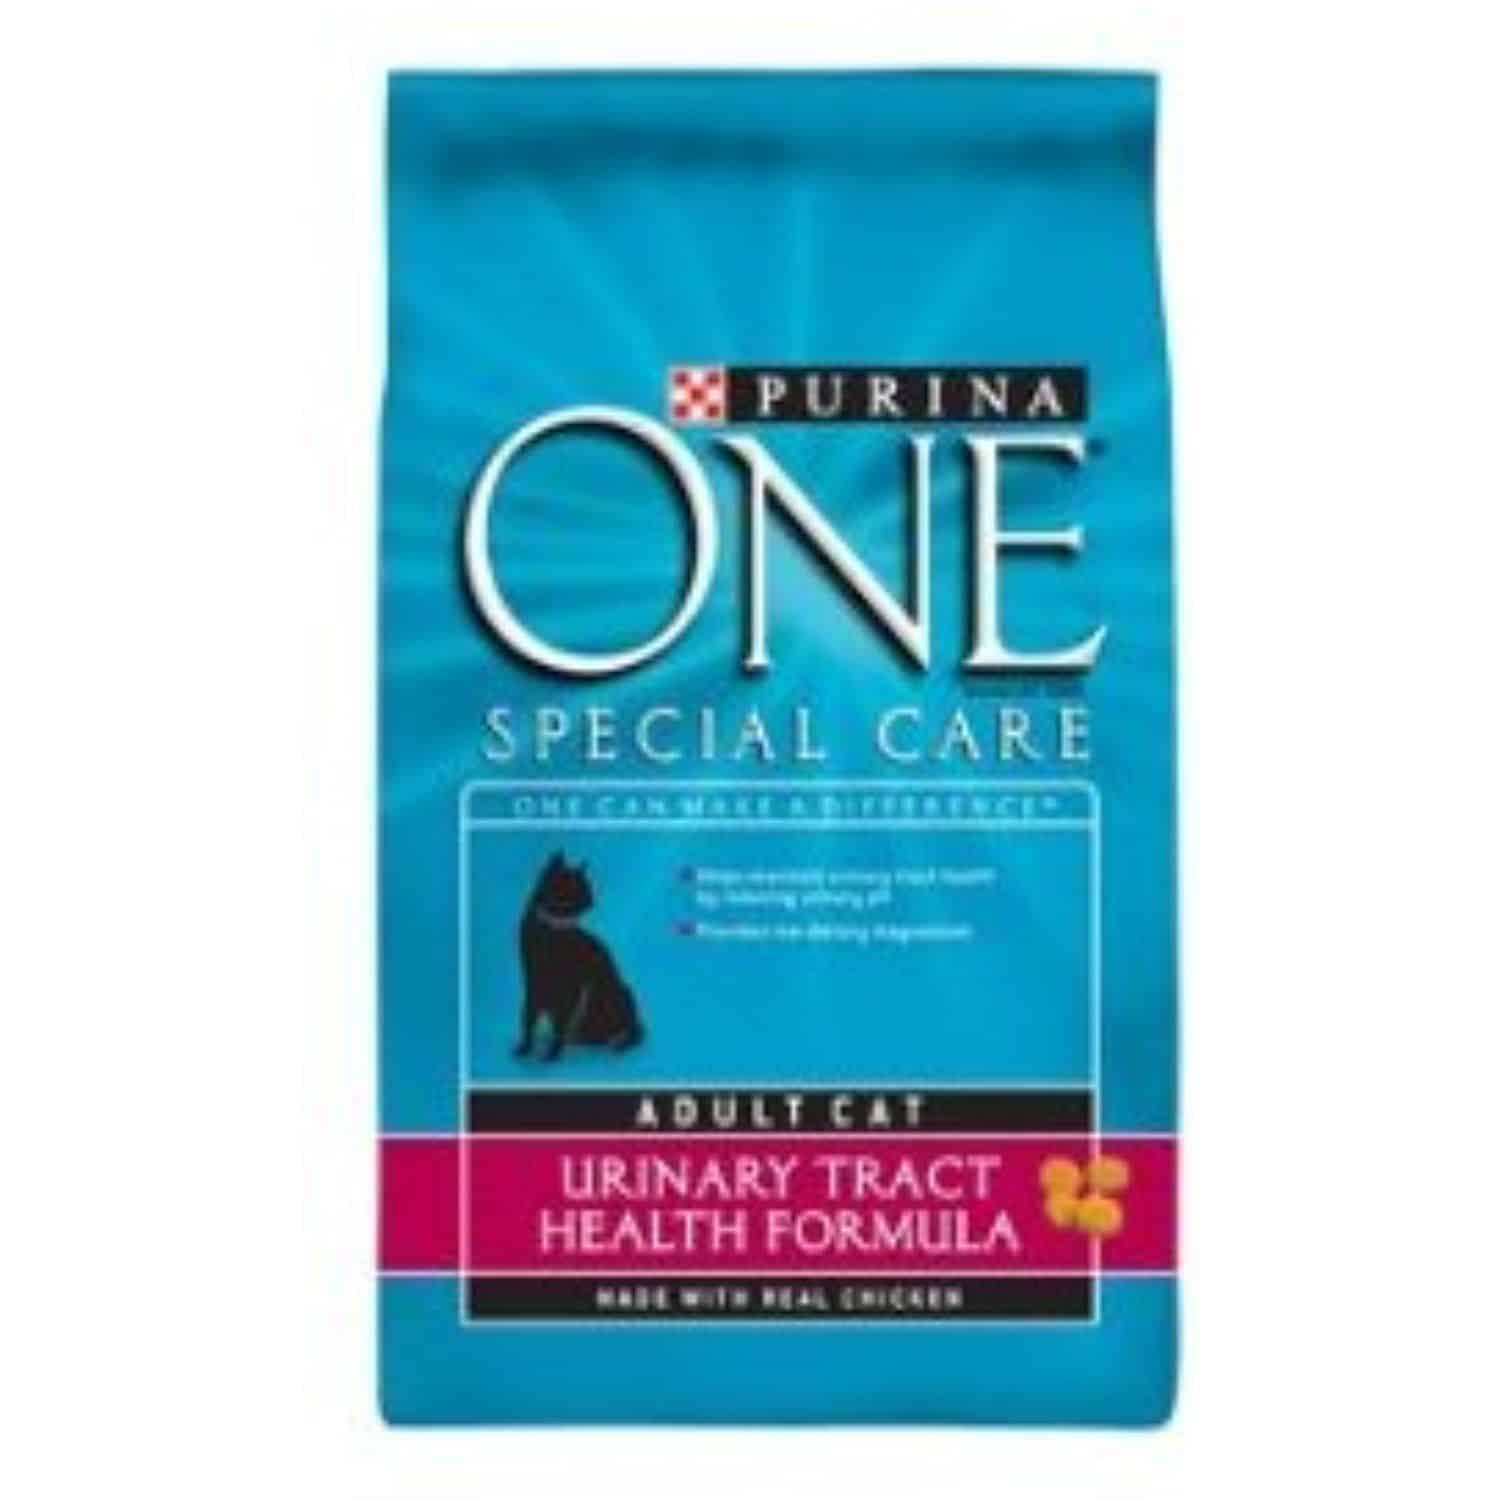 Purina One Special Care Urinary Tract Health Formula, 7 Lb Bag (Pack of ...